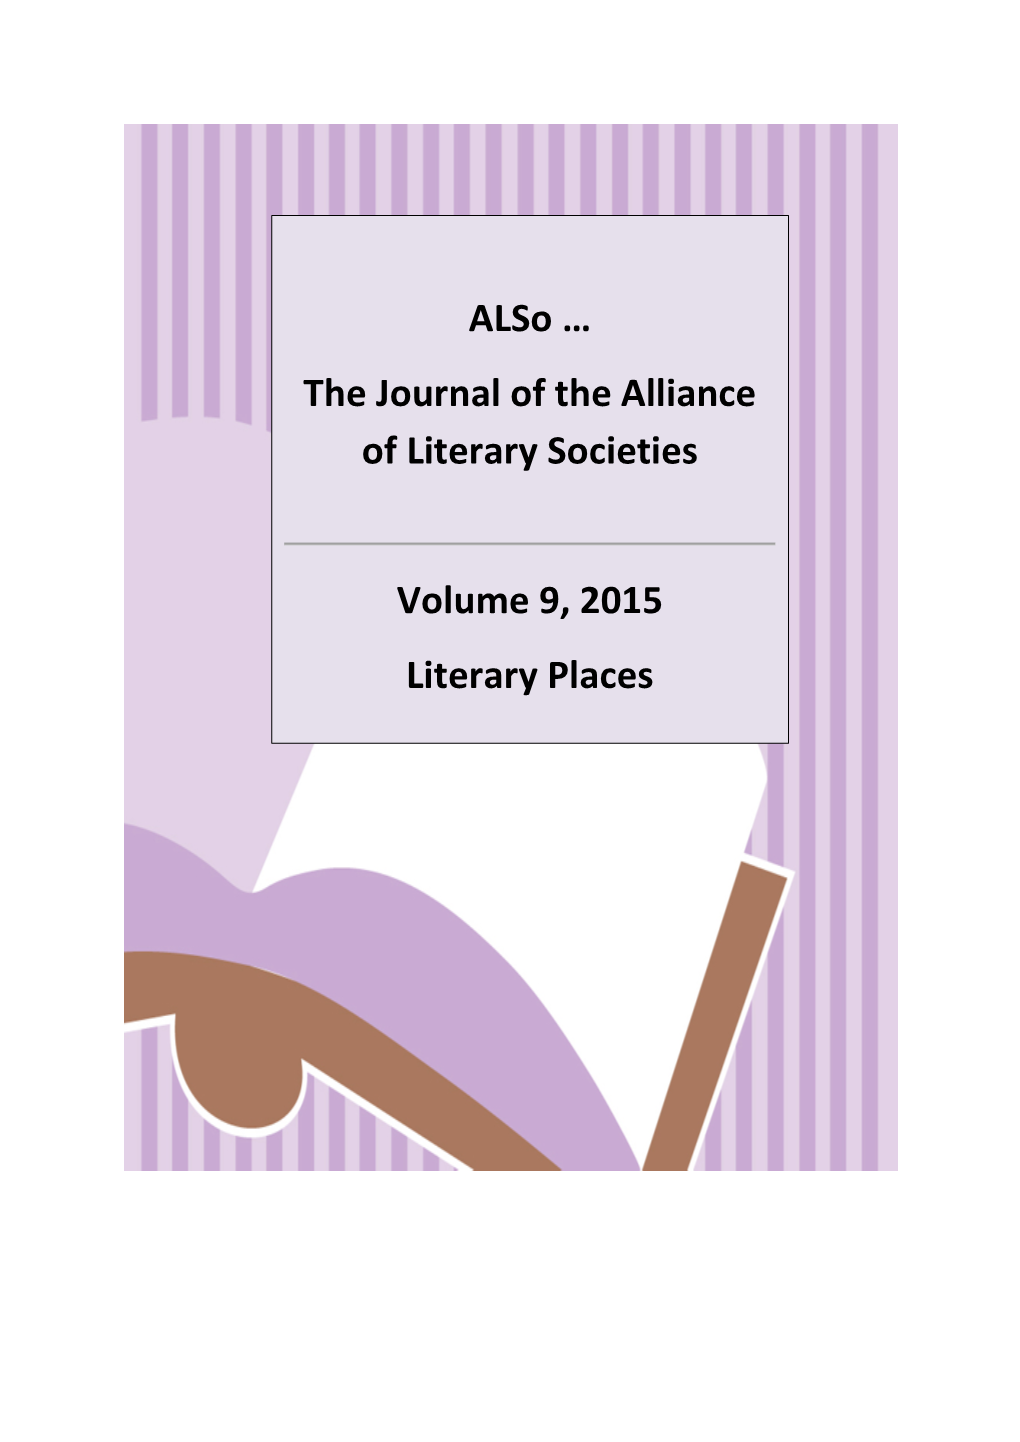 Also … the Journal of the Alliance of Literary Societies Volume 9, 2015